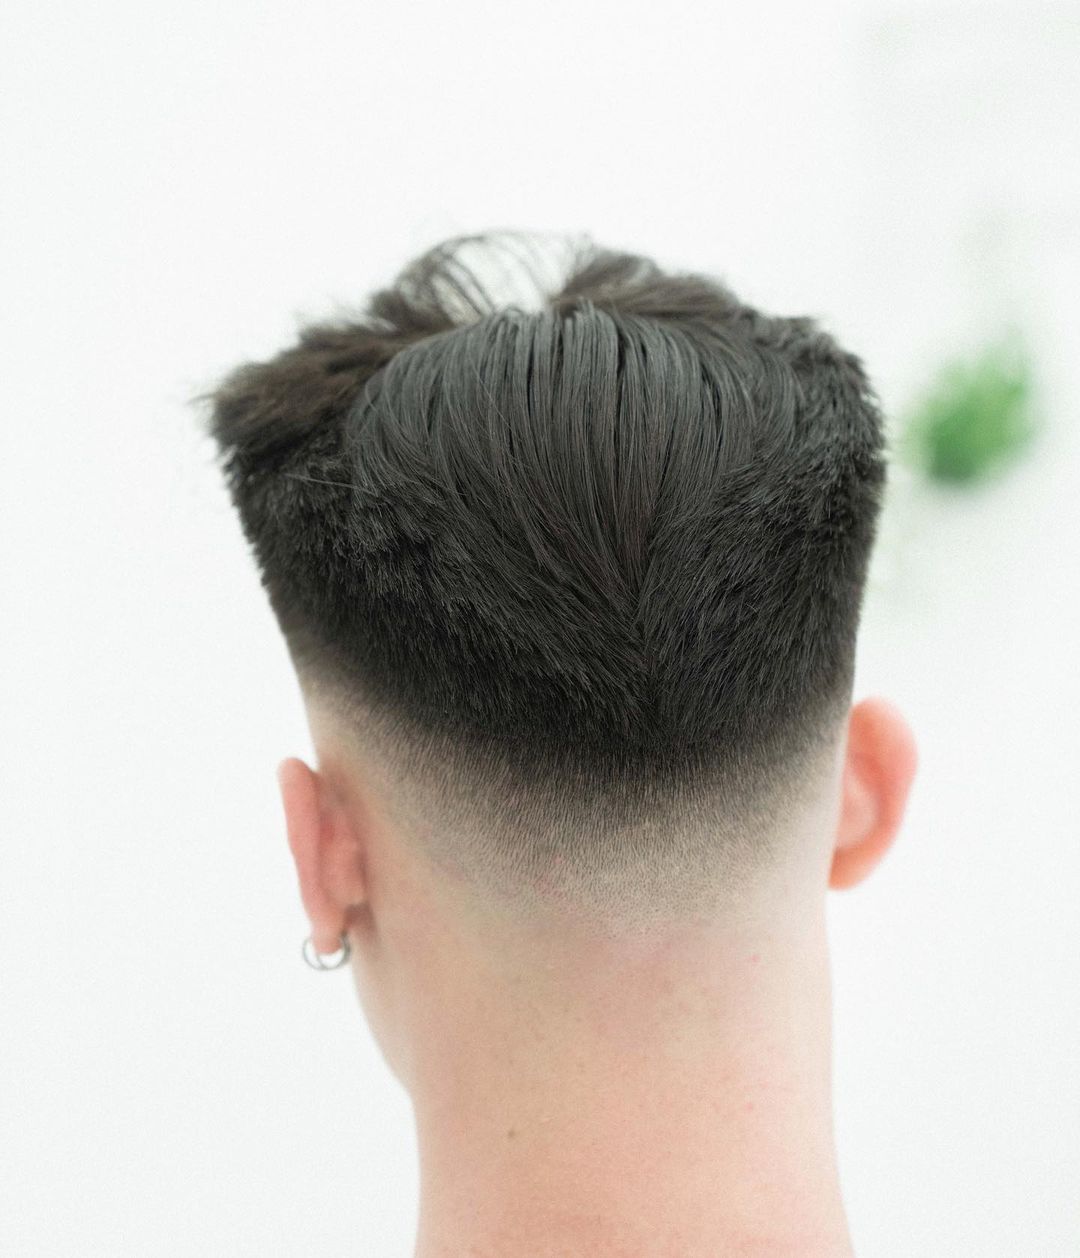 The Fade Haircut Trend Captivating Ideas for Men  Love Hairstyles